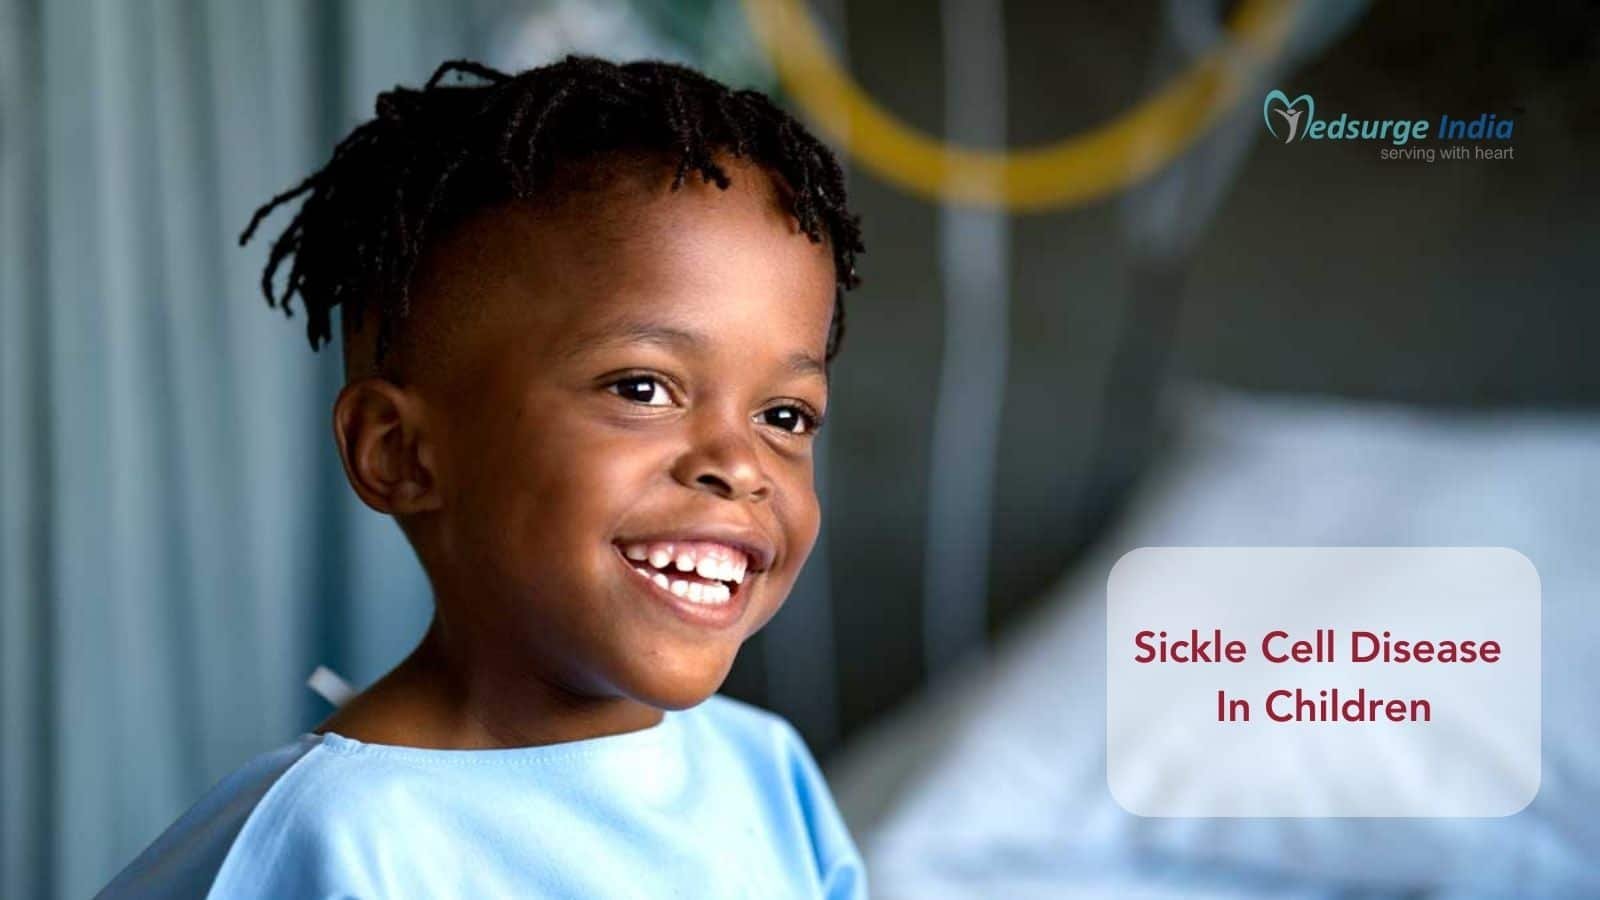 Sickle Cell Disease In Children: Early Detection, Intervention, And Long-term Management